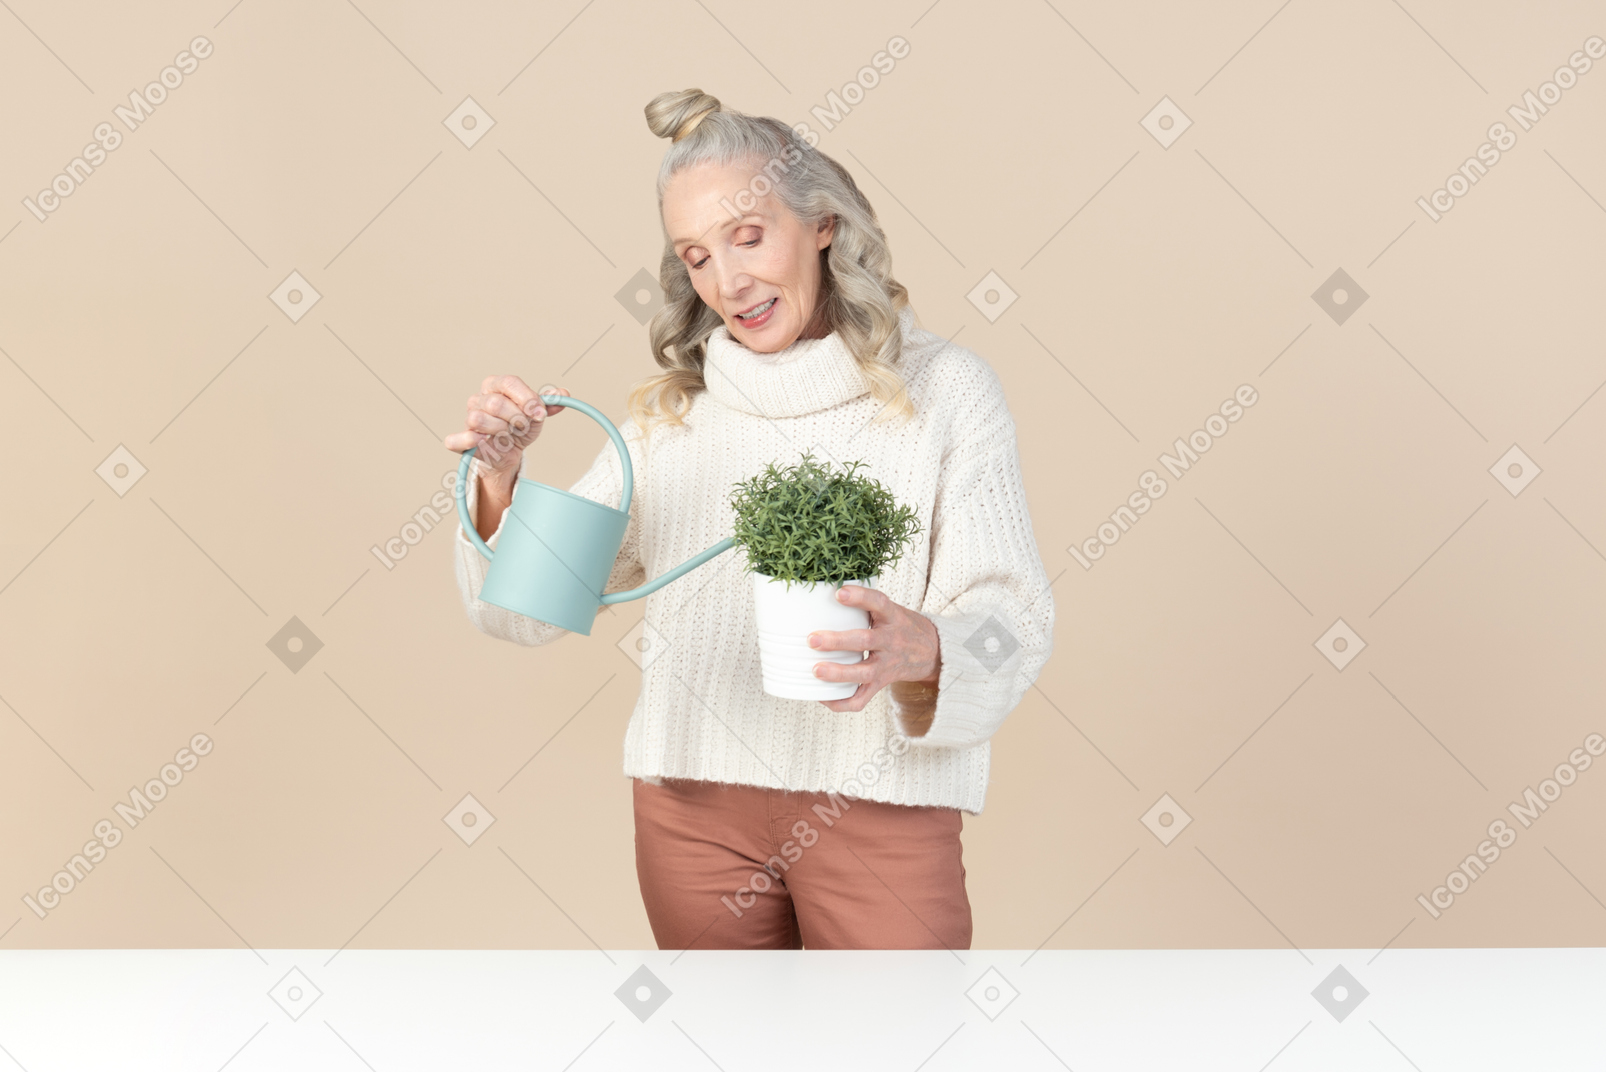 Old woman watering plant